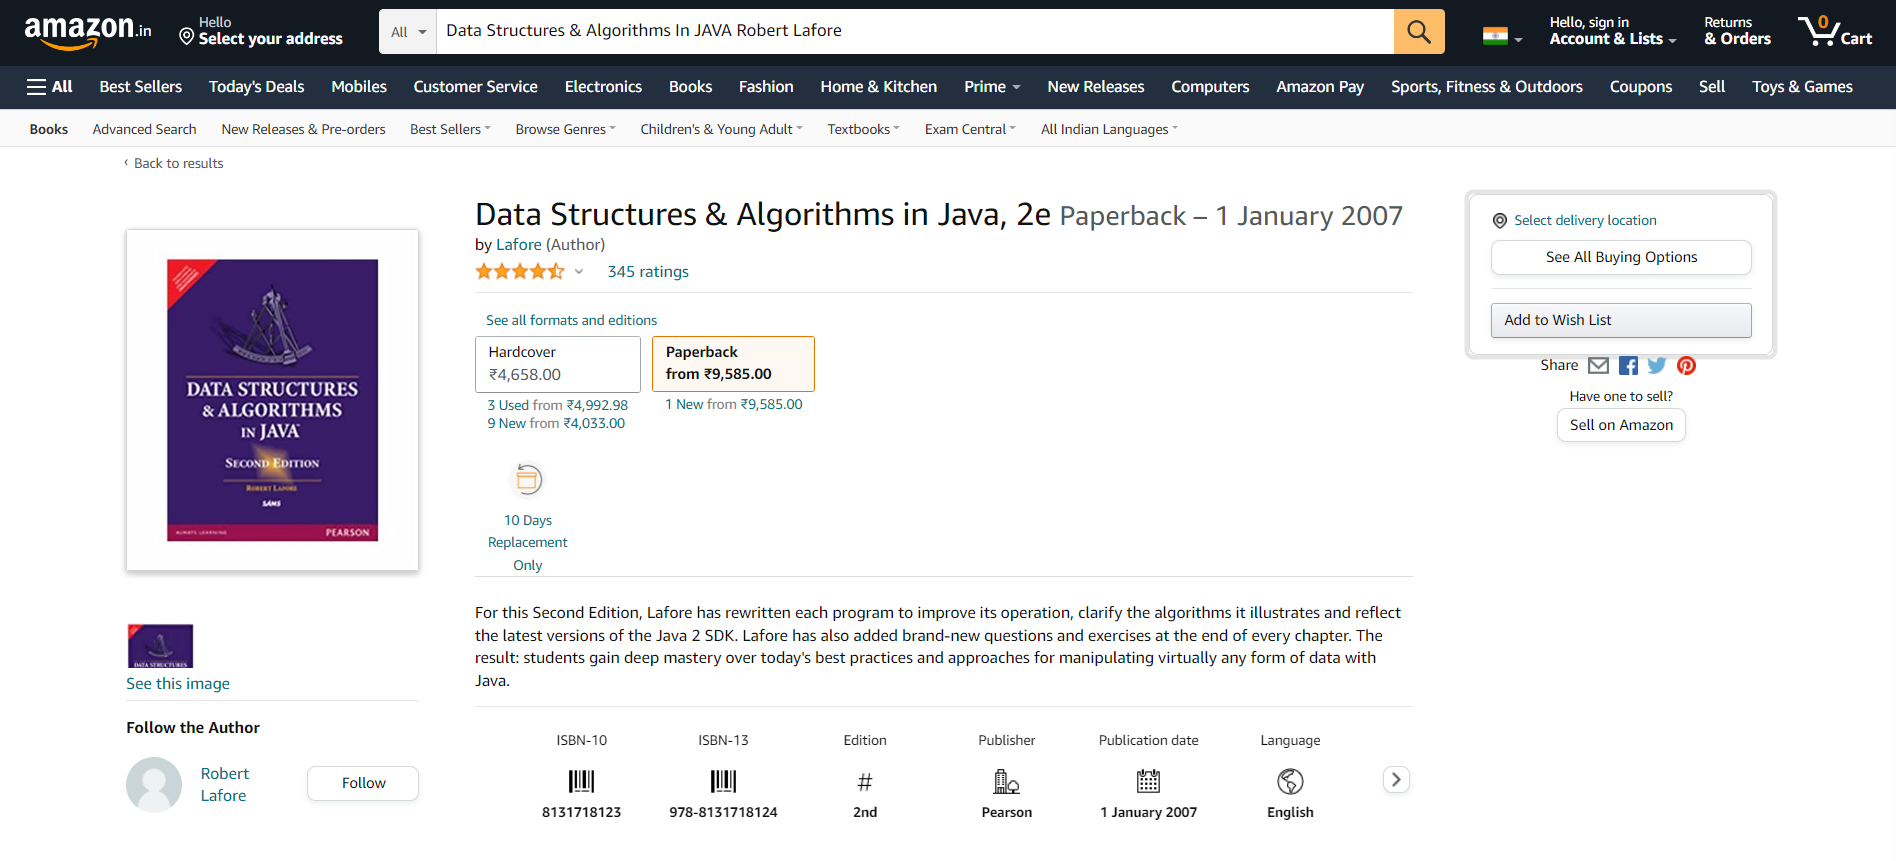 Data Structures And Algorithms In JAVA